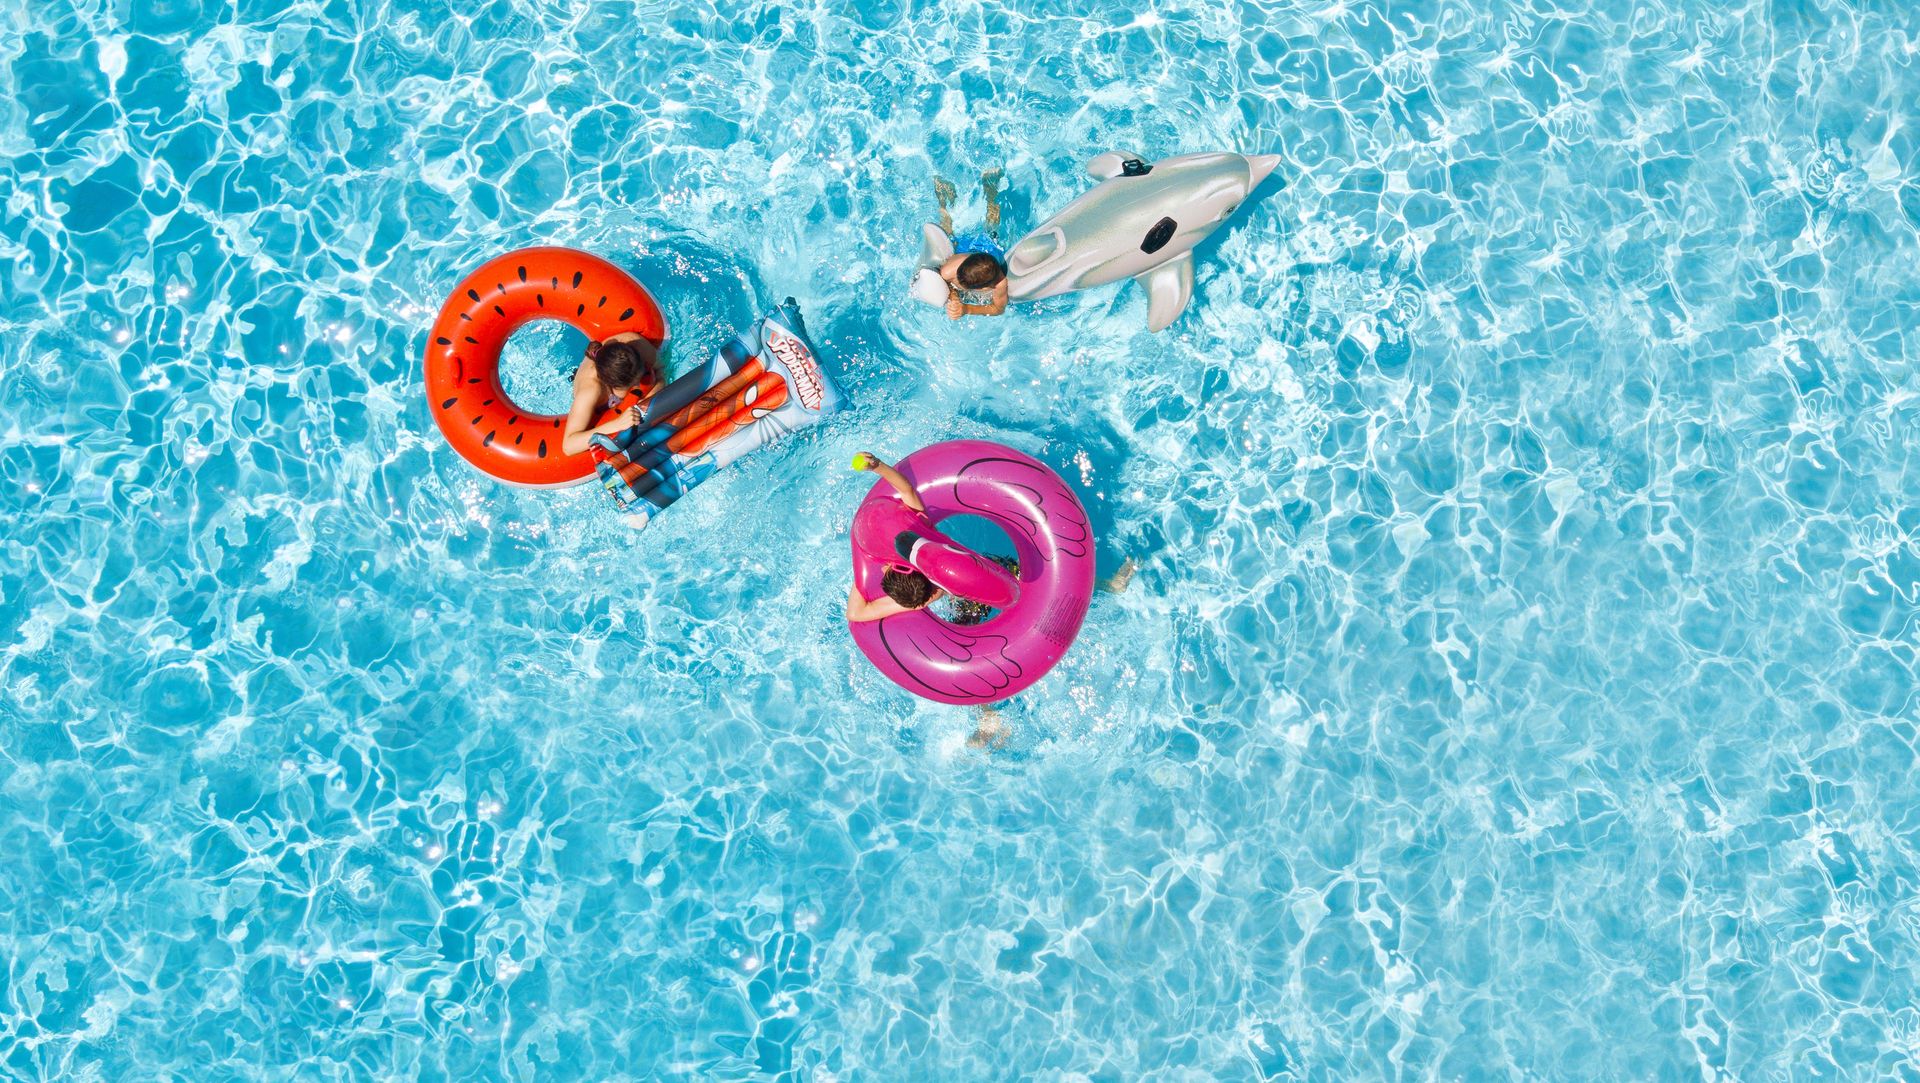 Three childred on inflatable floats in swimming pool